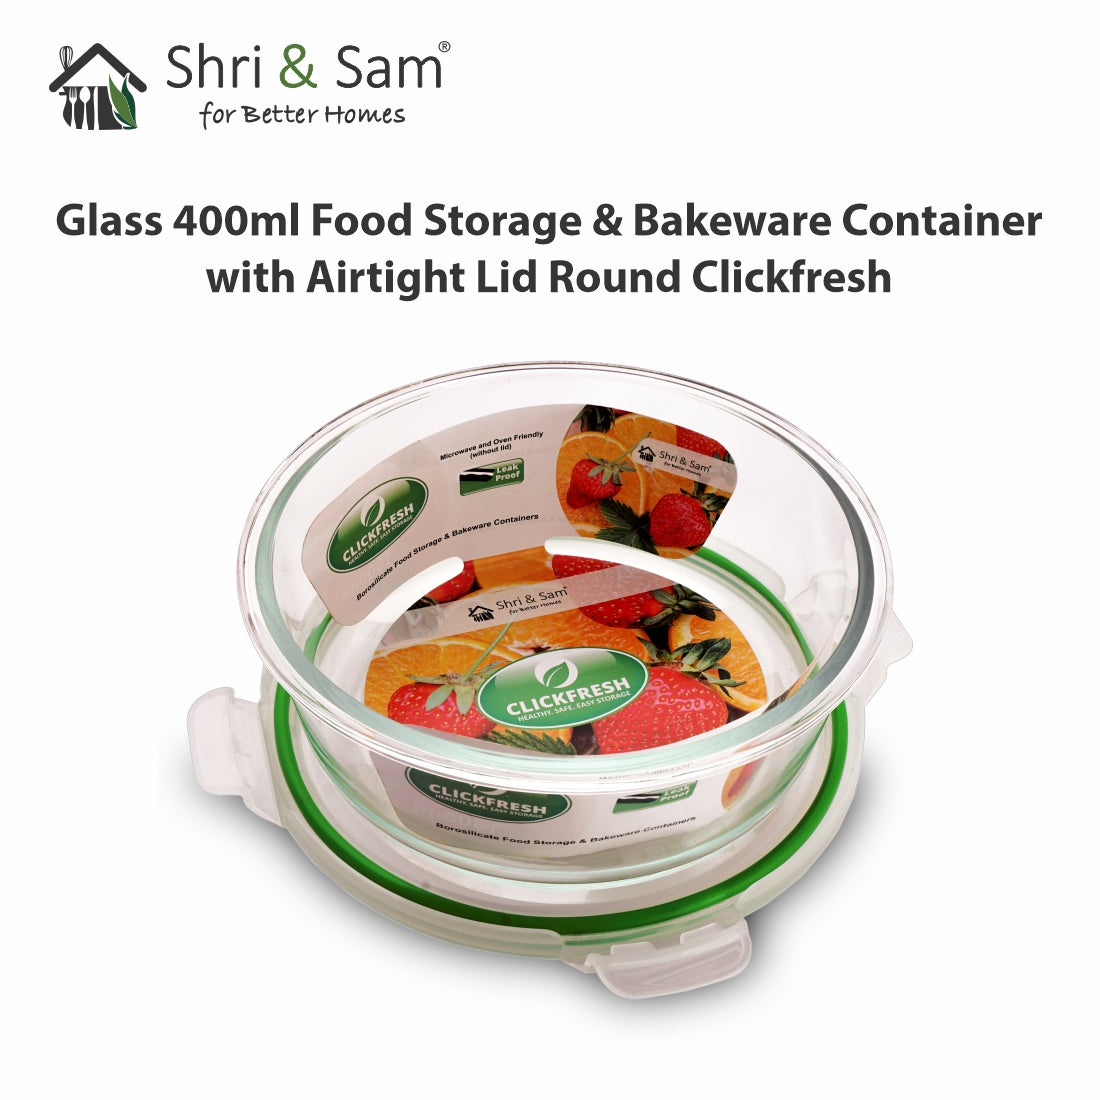 Glass 400ml Food Storage & Bakeware Container with Airtight Lid Round Clickfresh